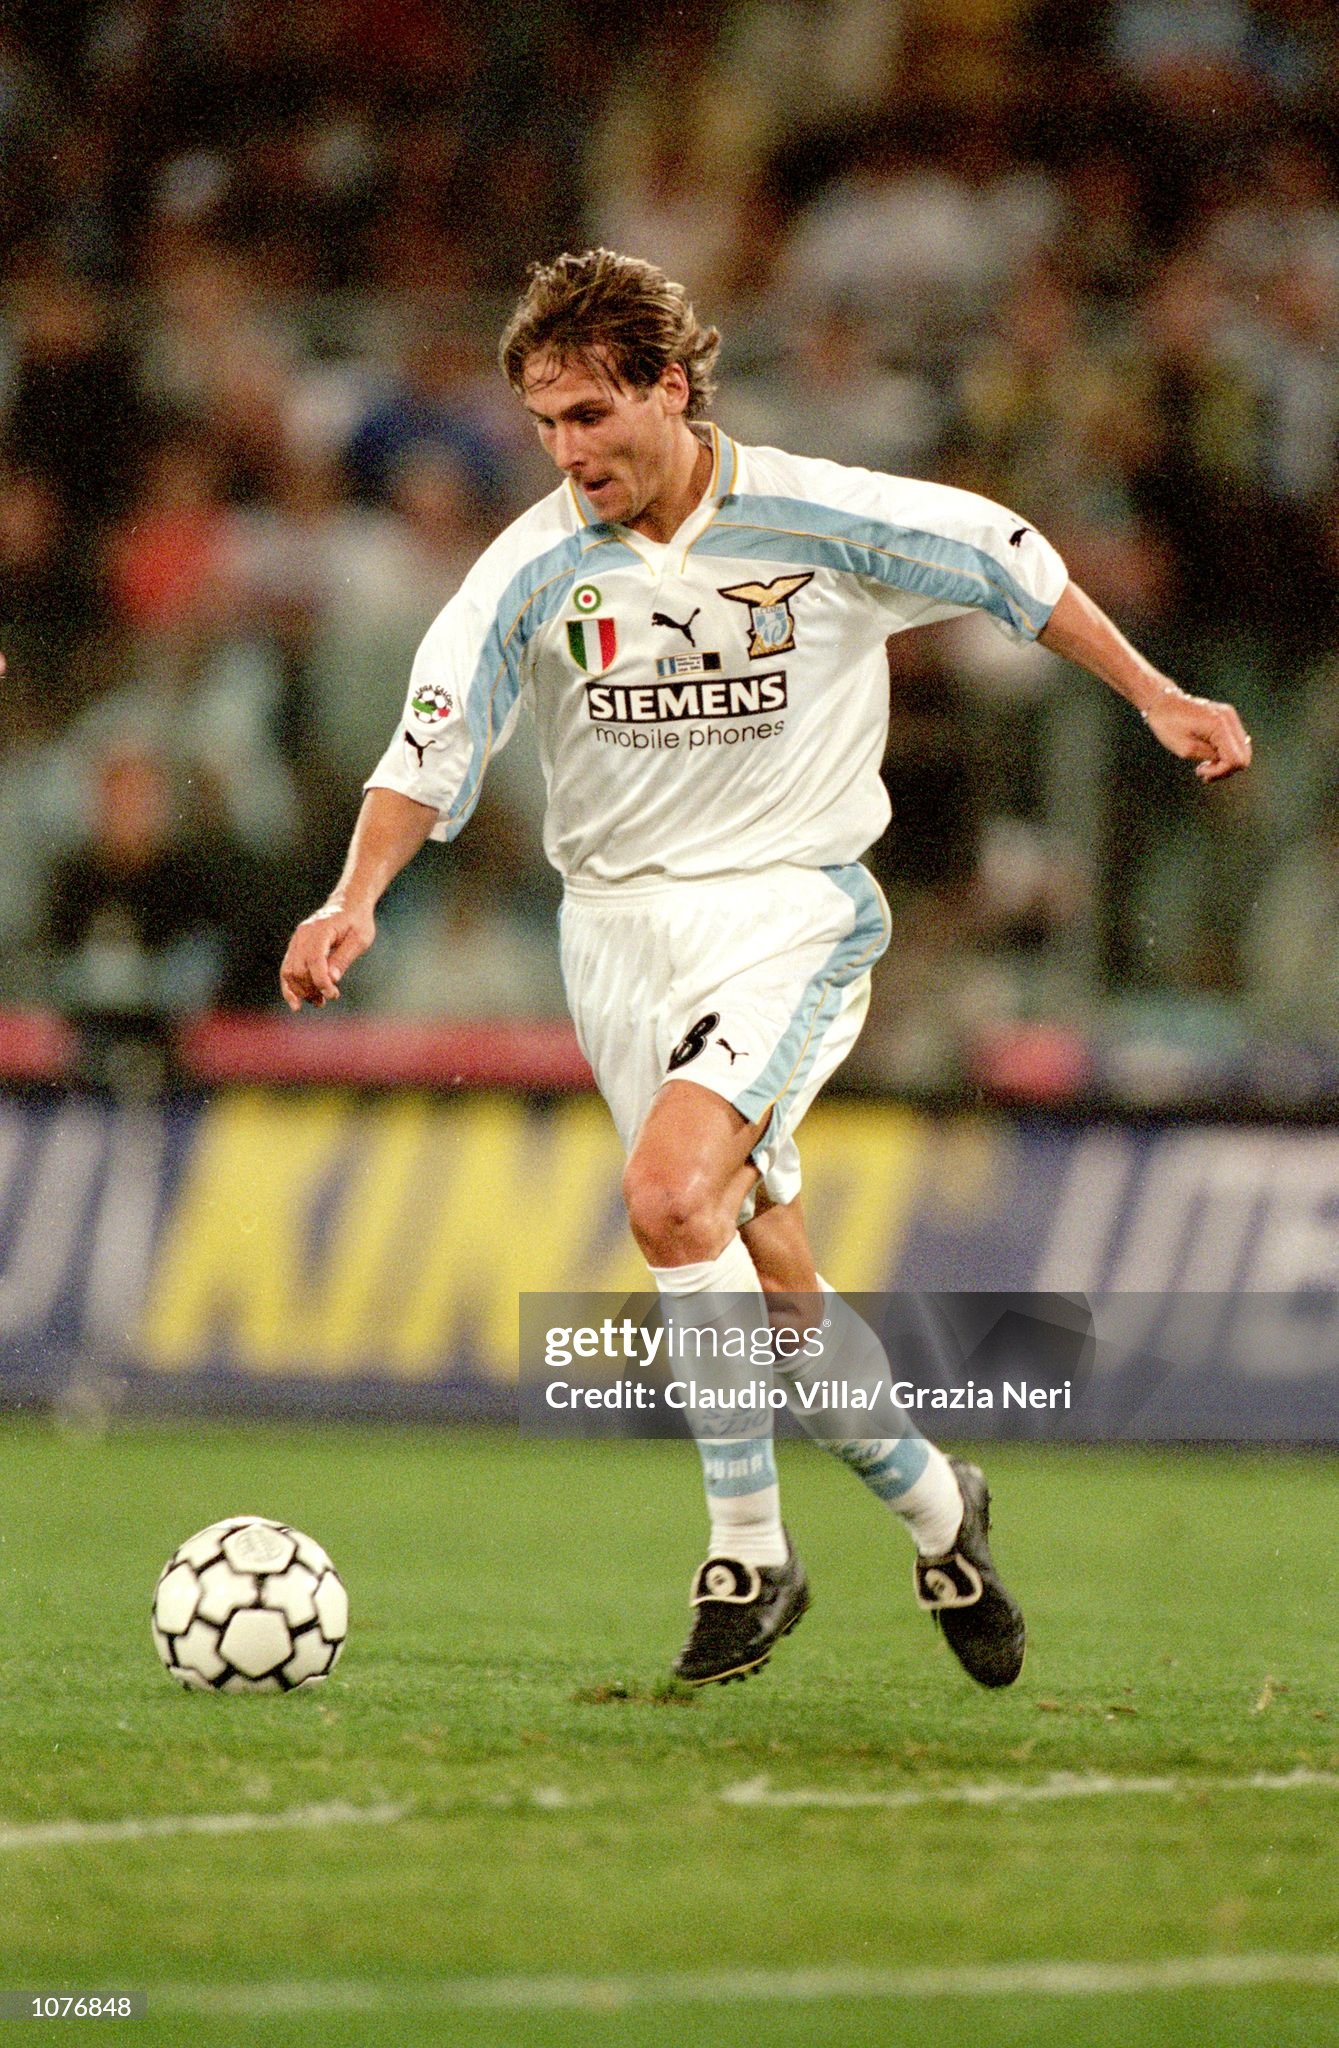 gettyimages-1076848-2048x2048.jpg : SS Lazio 1999-00 Away No.18 Nedved